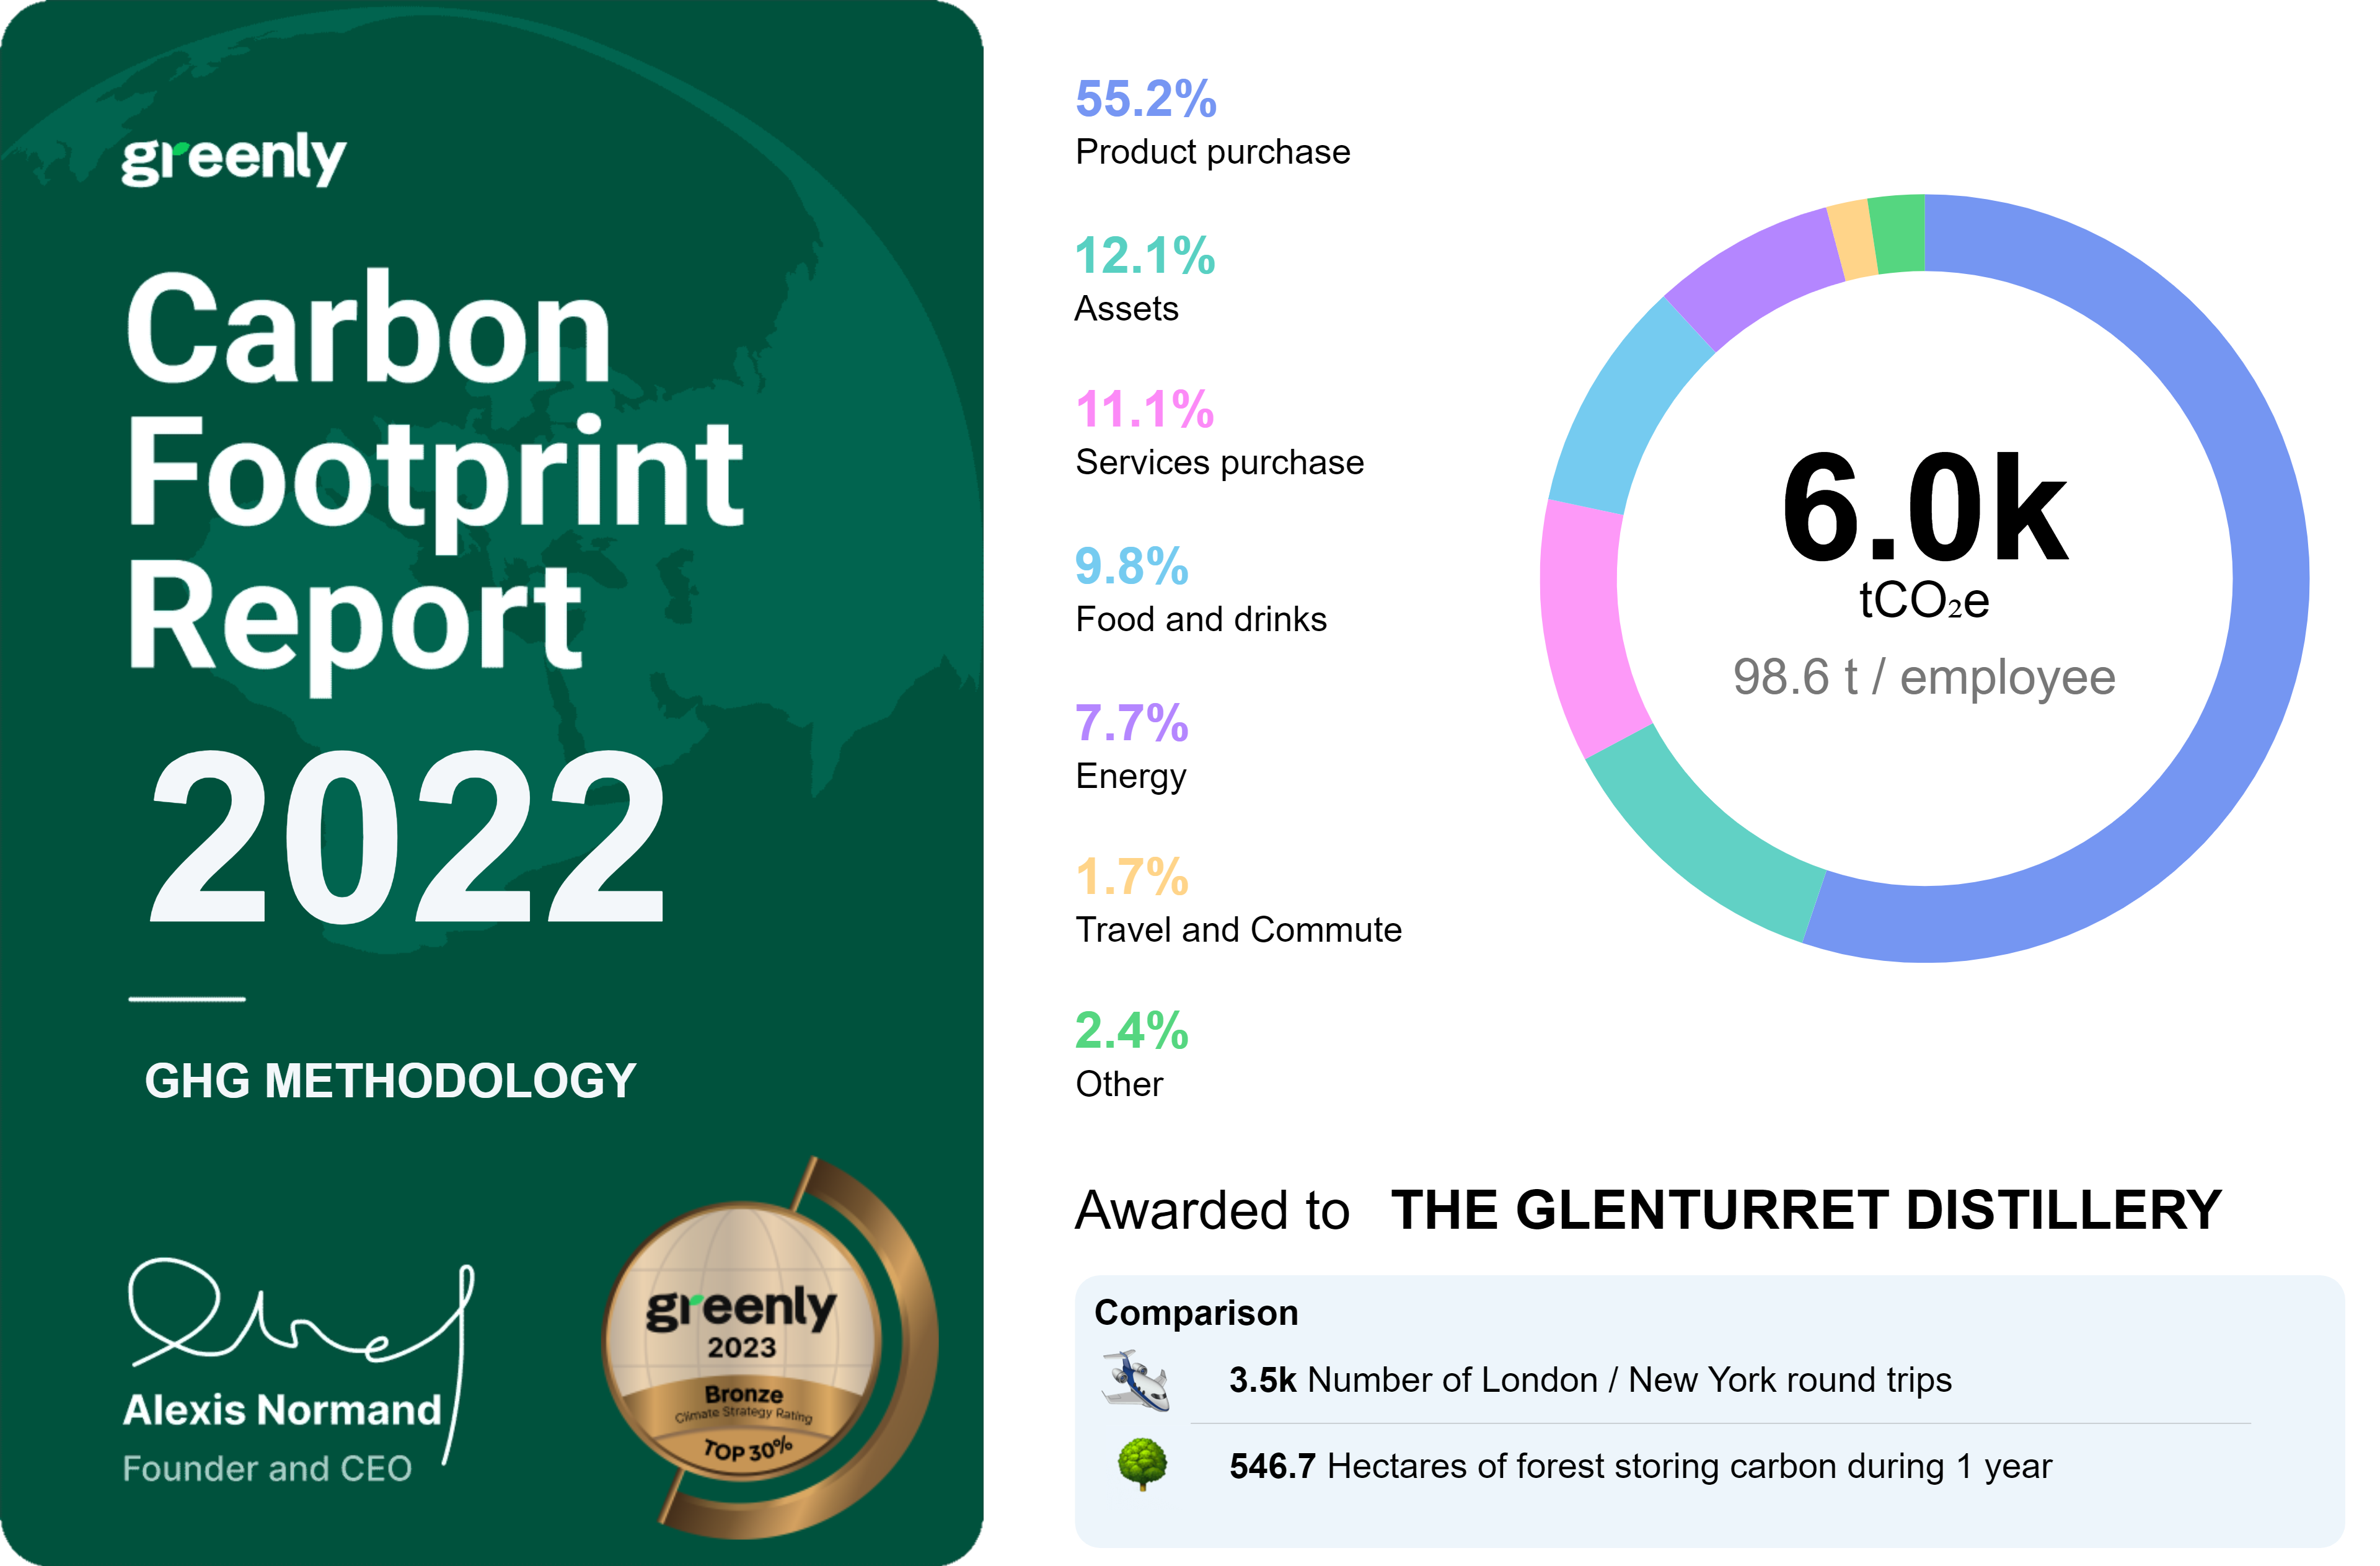 Greenly 2022 Report